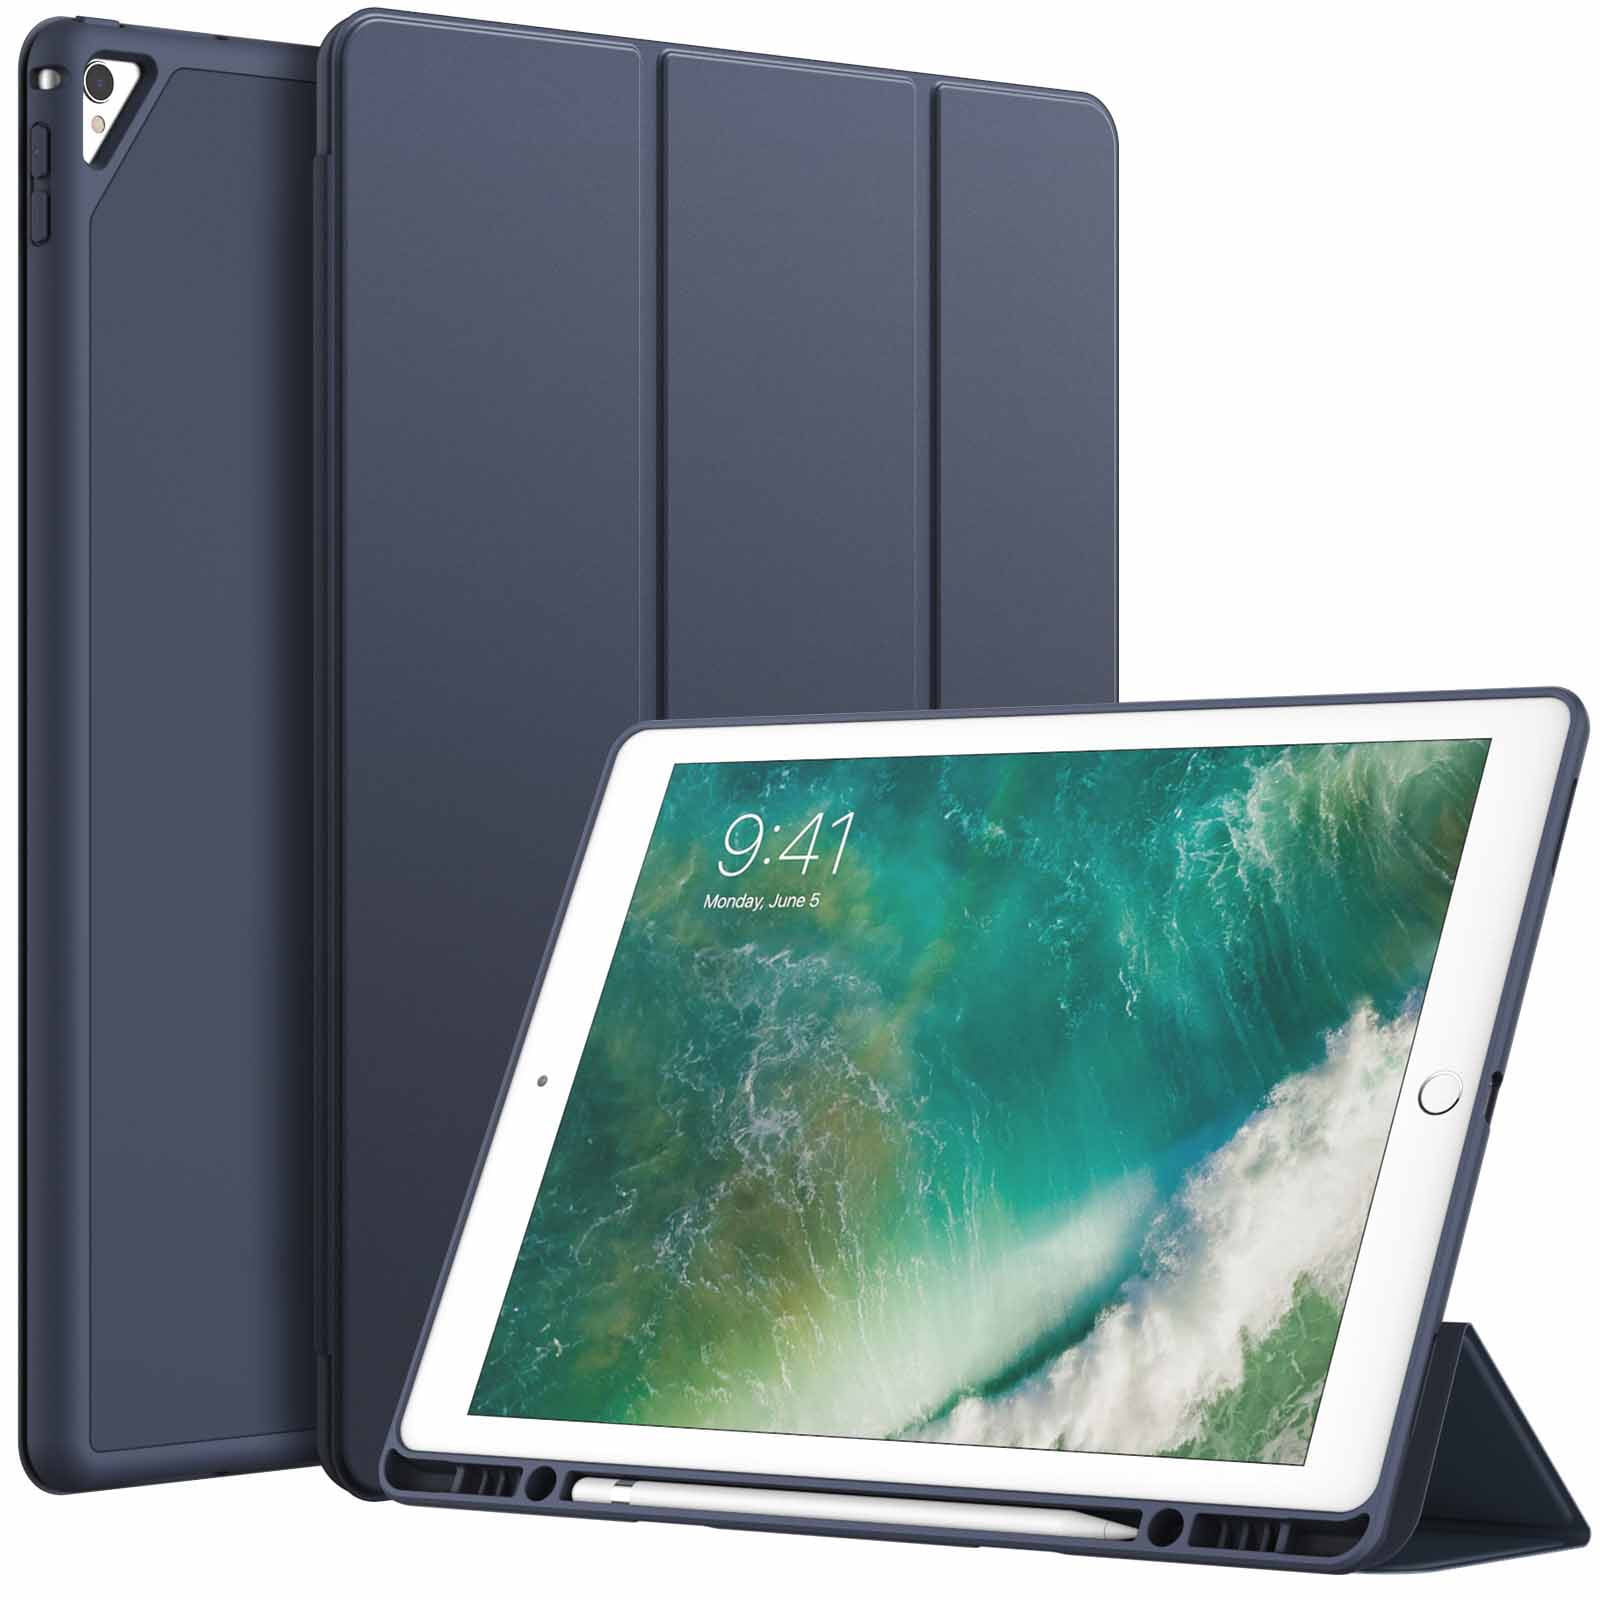 JETech Case for iPad Pro 10.5-Inch and iPad Air 3 (10.5-Inch 2019, 3rd  Generation) with Pencil Holder, Slim Tablet Cover with Soft TPU Back, Auto